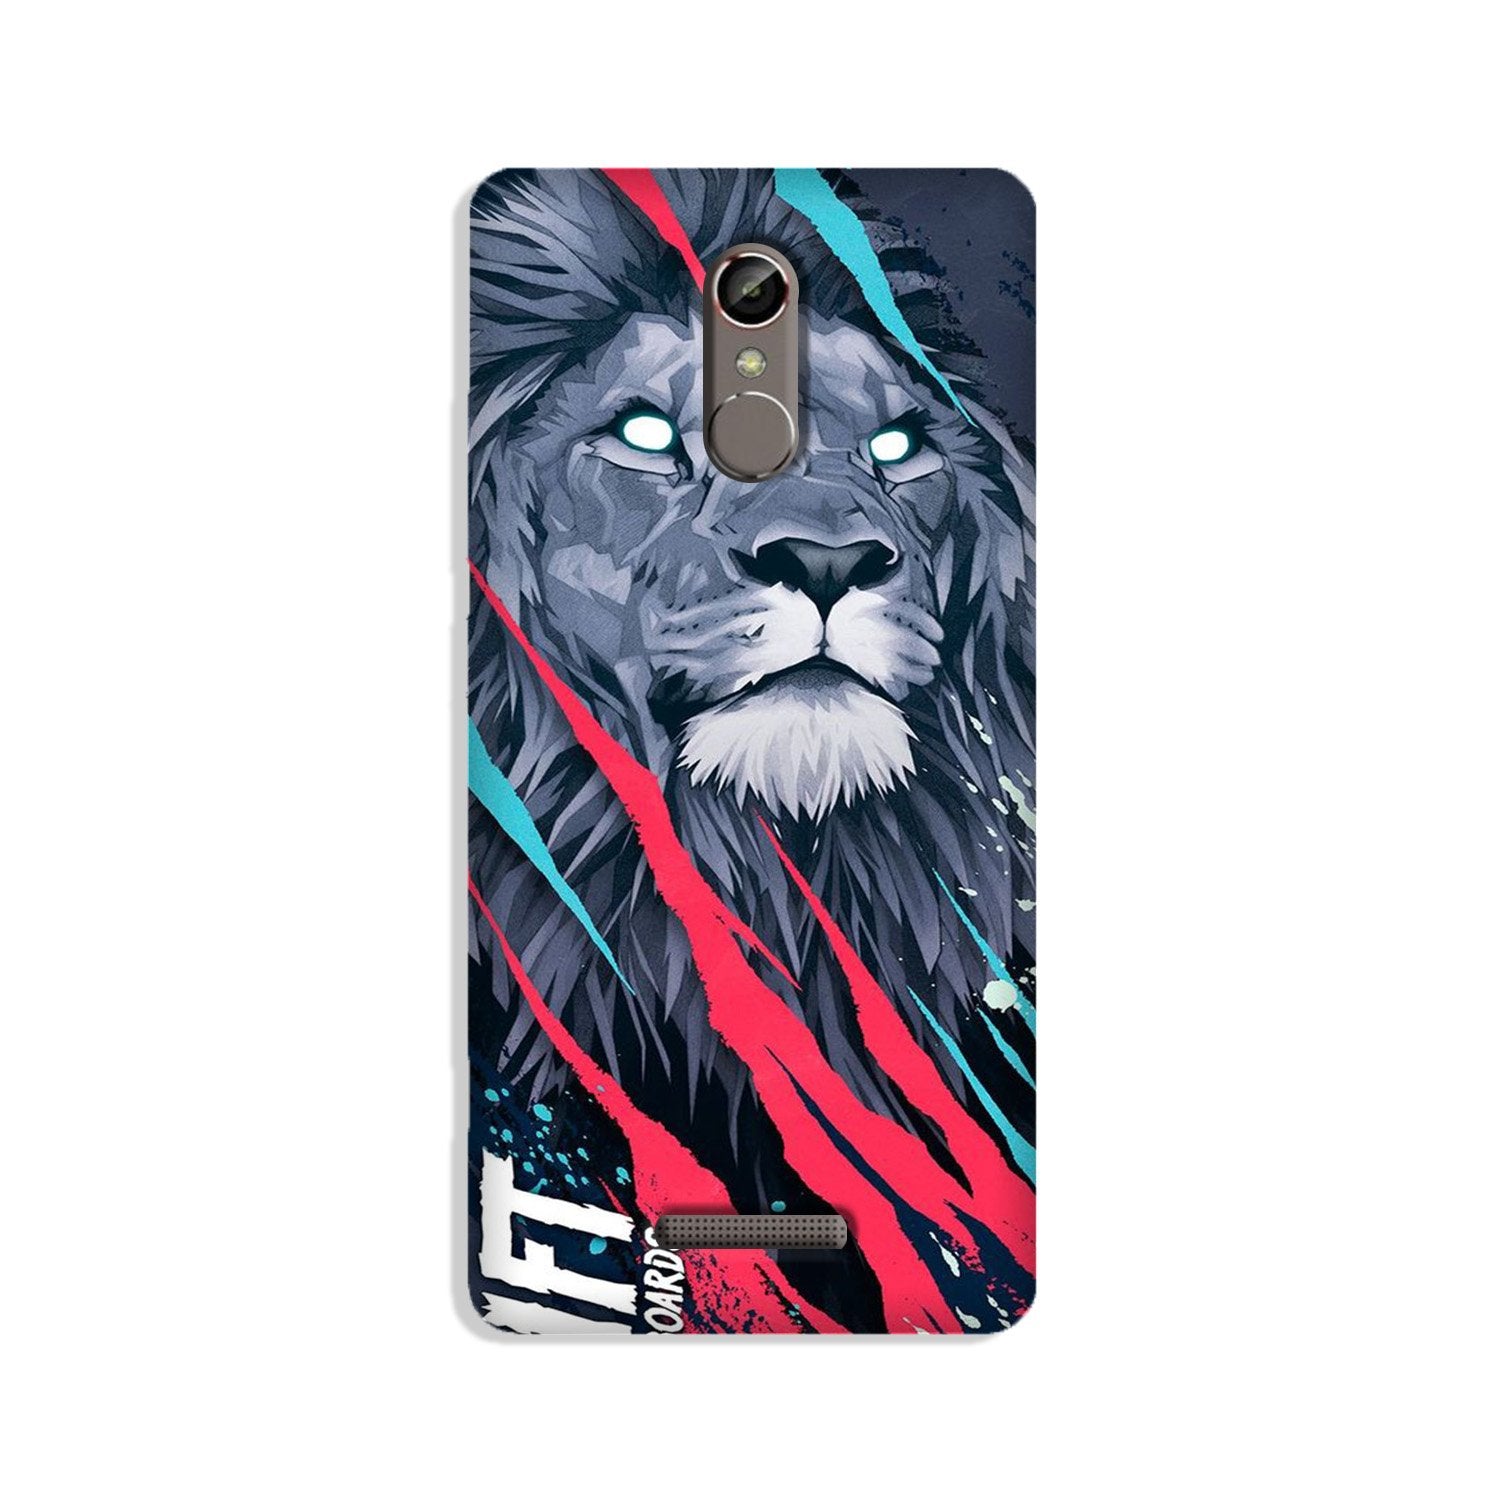 Lion Case for Gionee S6s (Design No. 278)